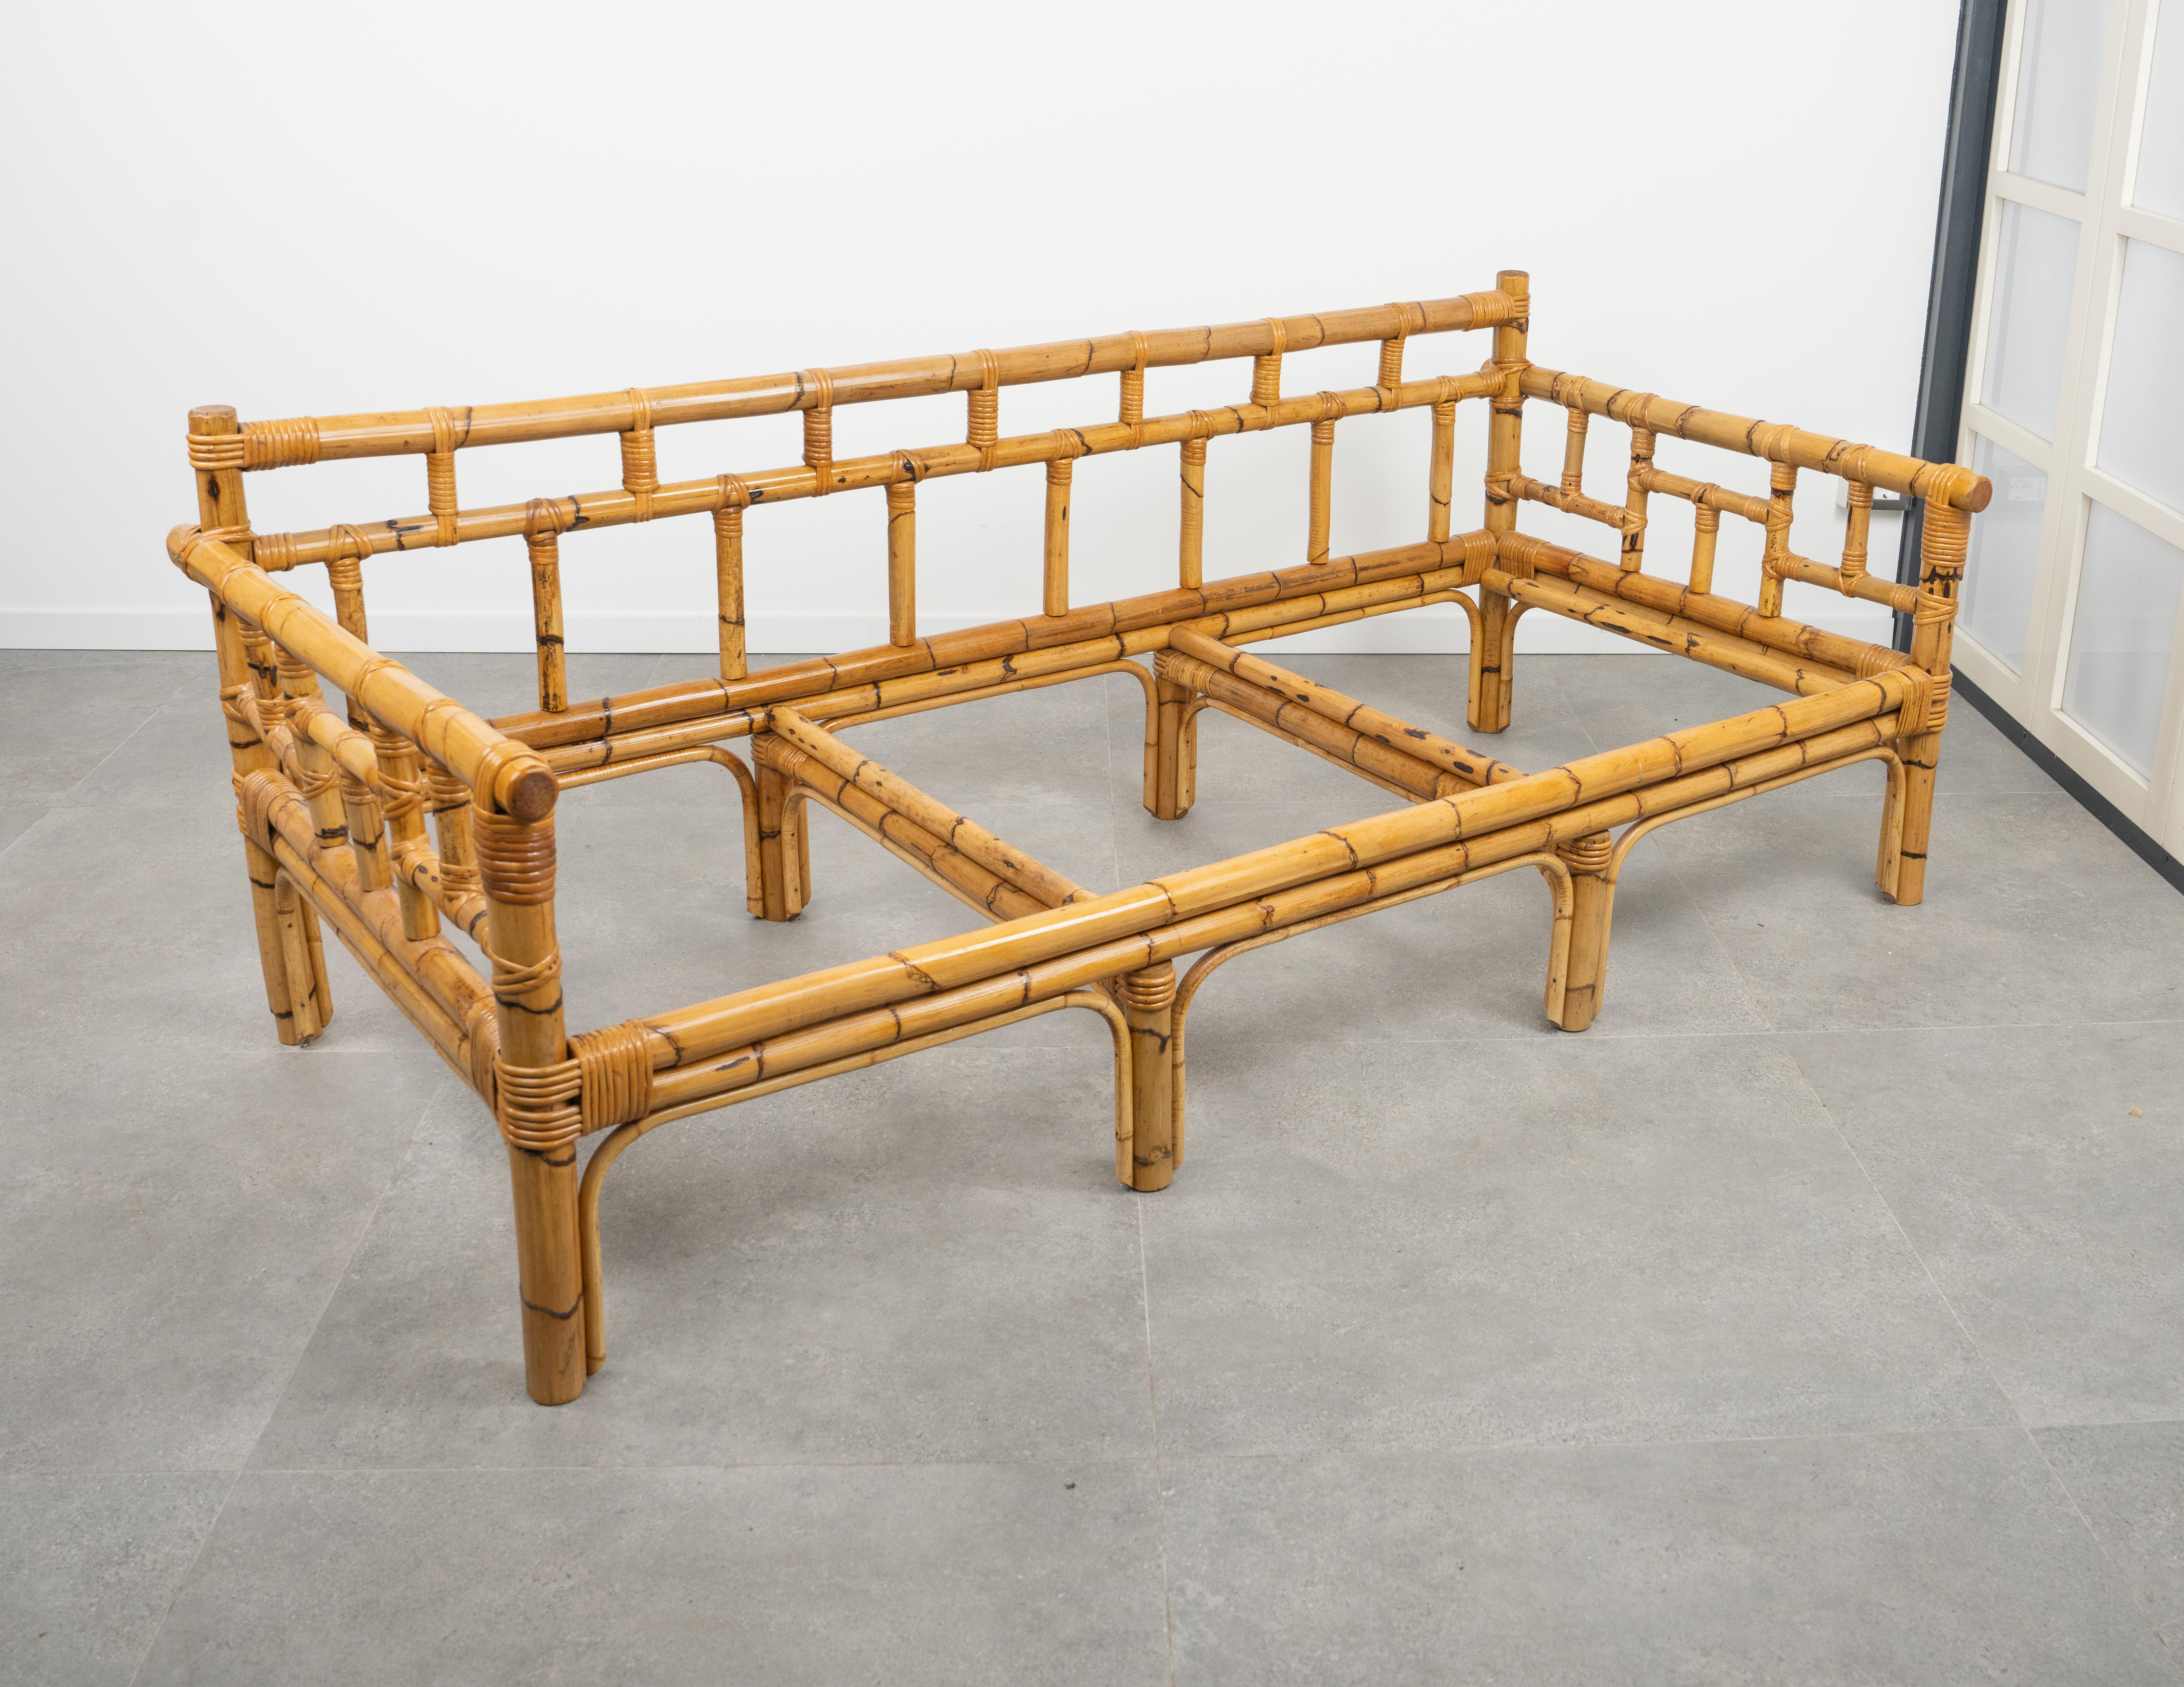 Italian Midcentury Bamboo and Rattan Three-Seat Sofa by Vivai Del Sud, Italy 1970s For Sale